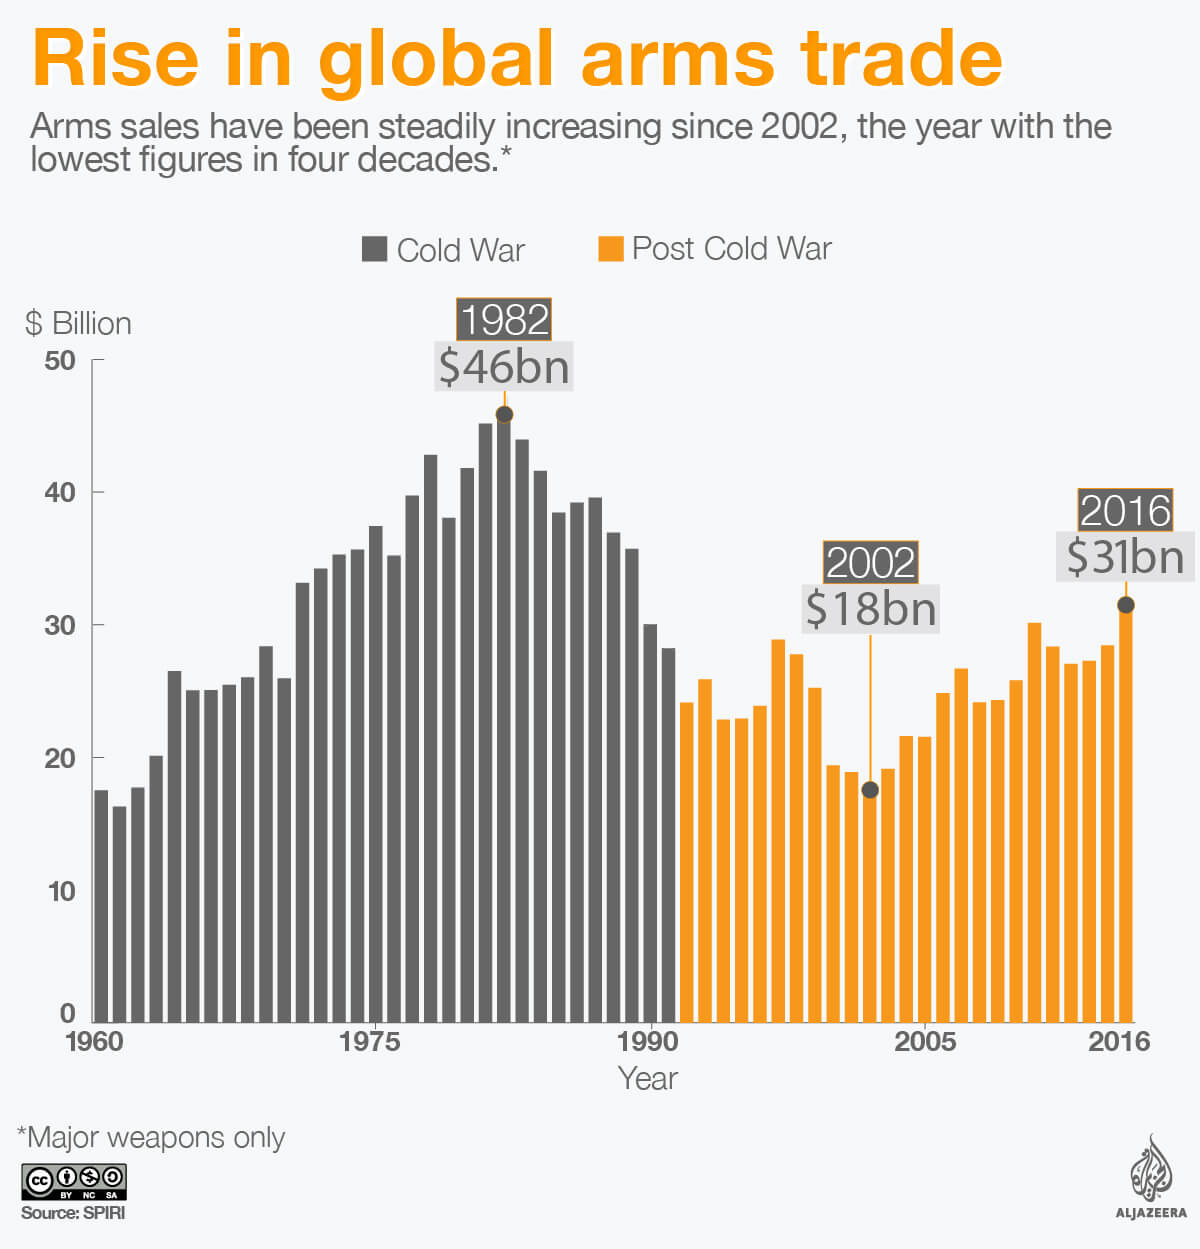 gloabal arms trade since end of cold war